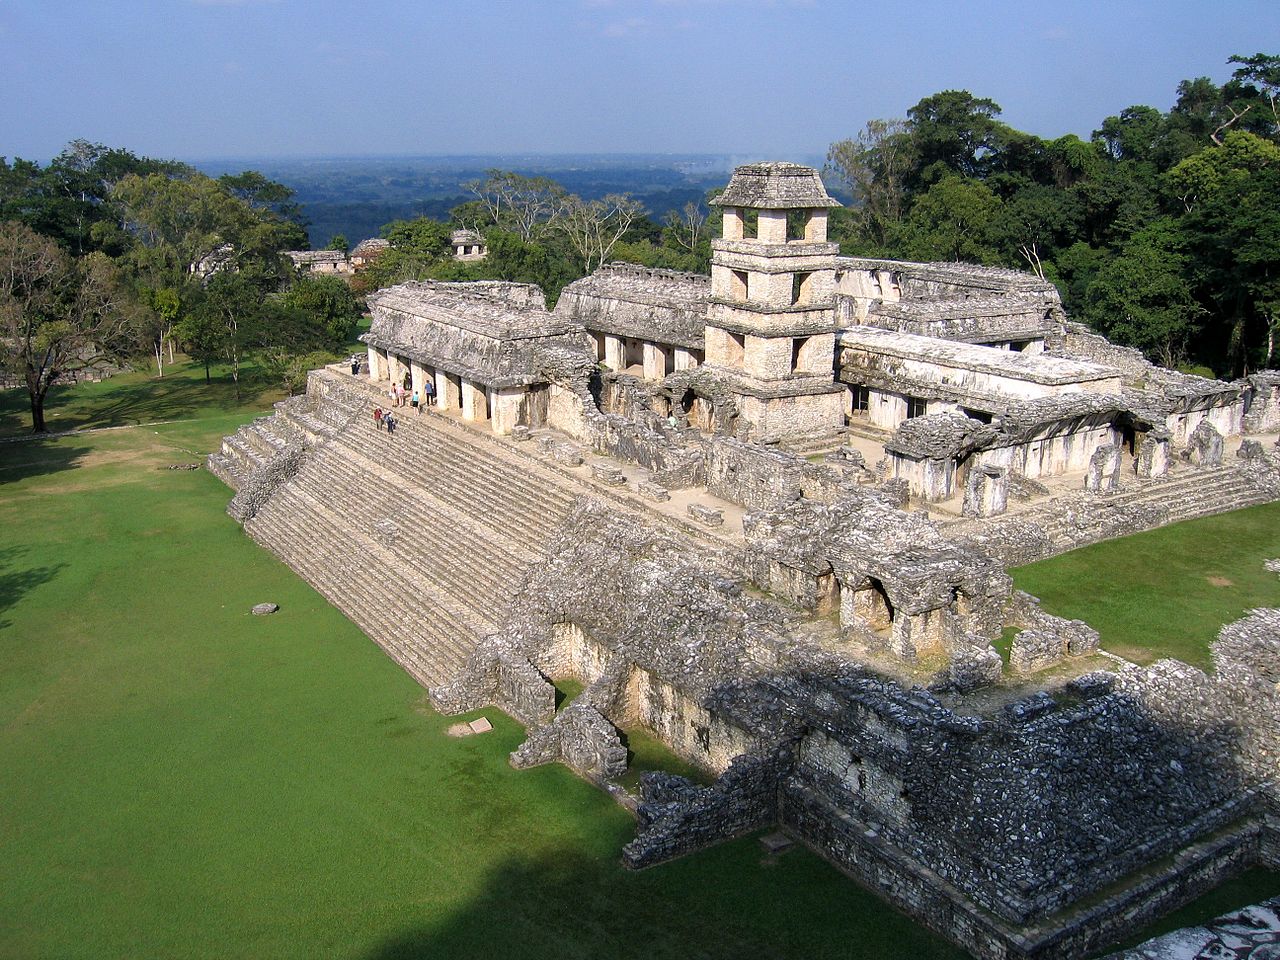 Classic Period royal palace at Palenque. Peter Andersen  - CC BY-SA 3.0